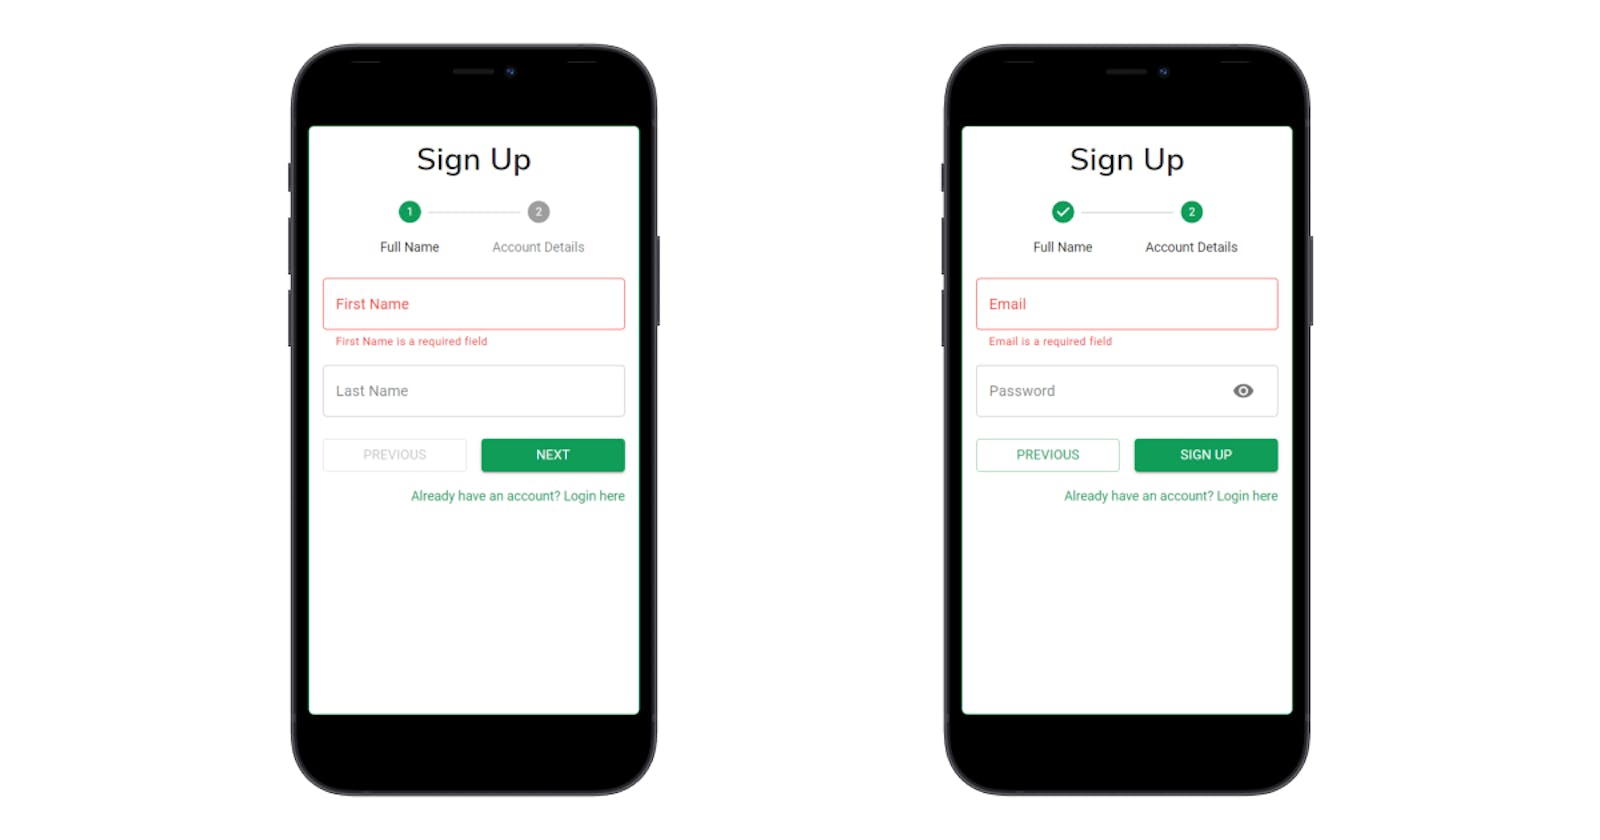 Designing forms for mobile